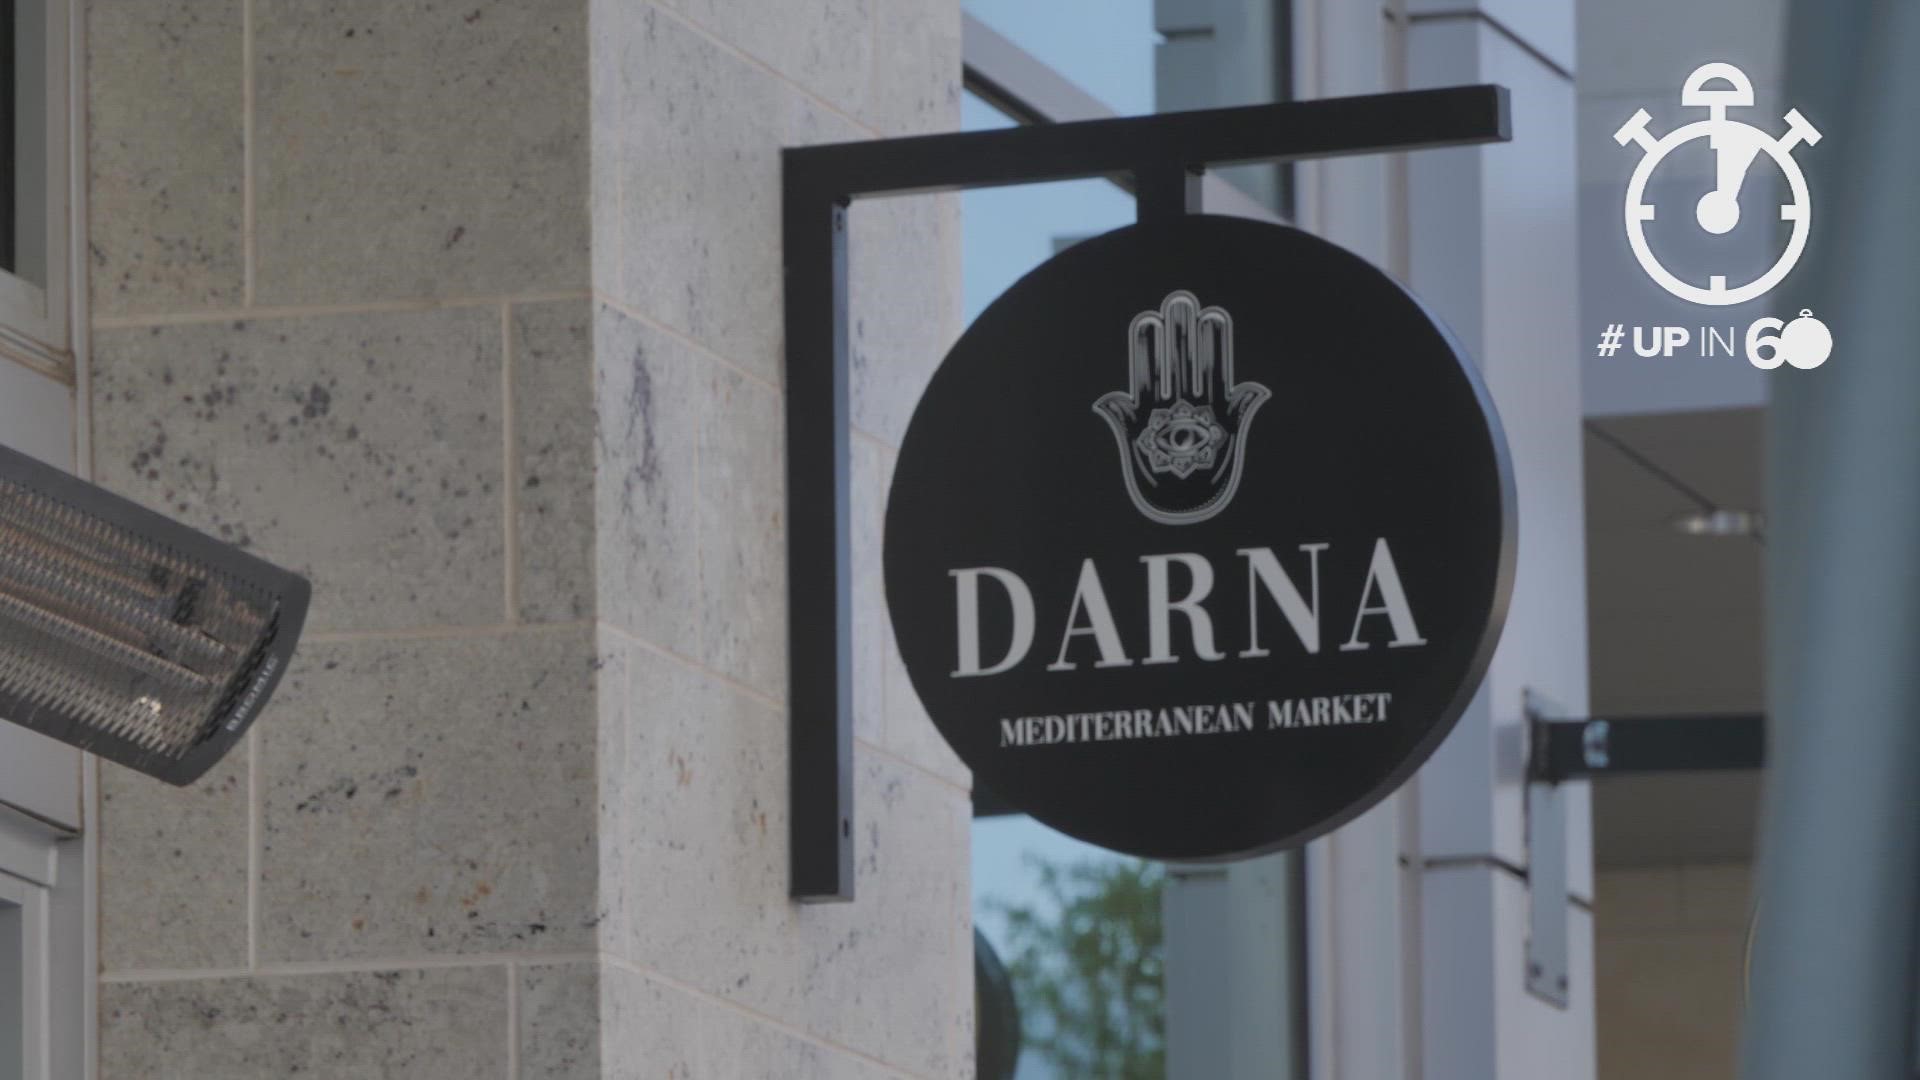 Darna Mediterranean Market offers customers a variety of options.